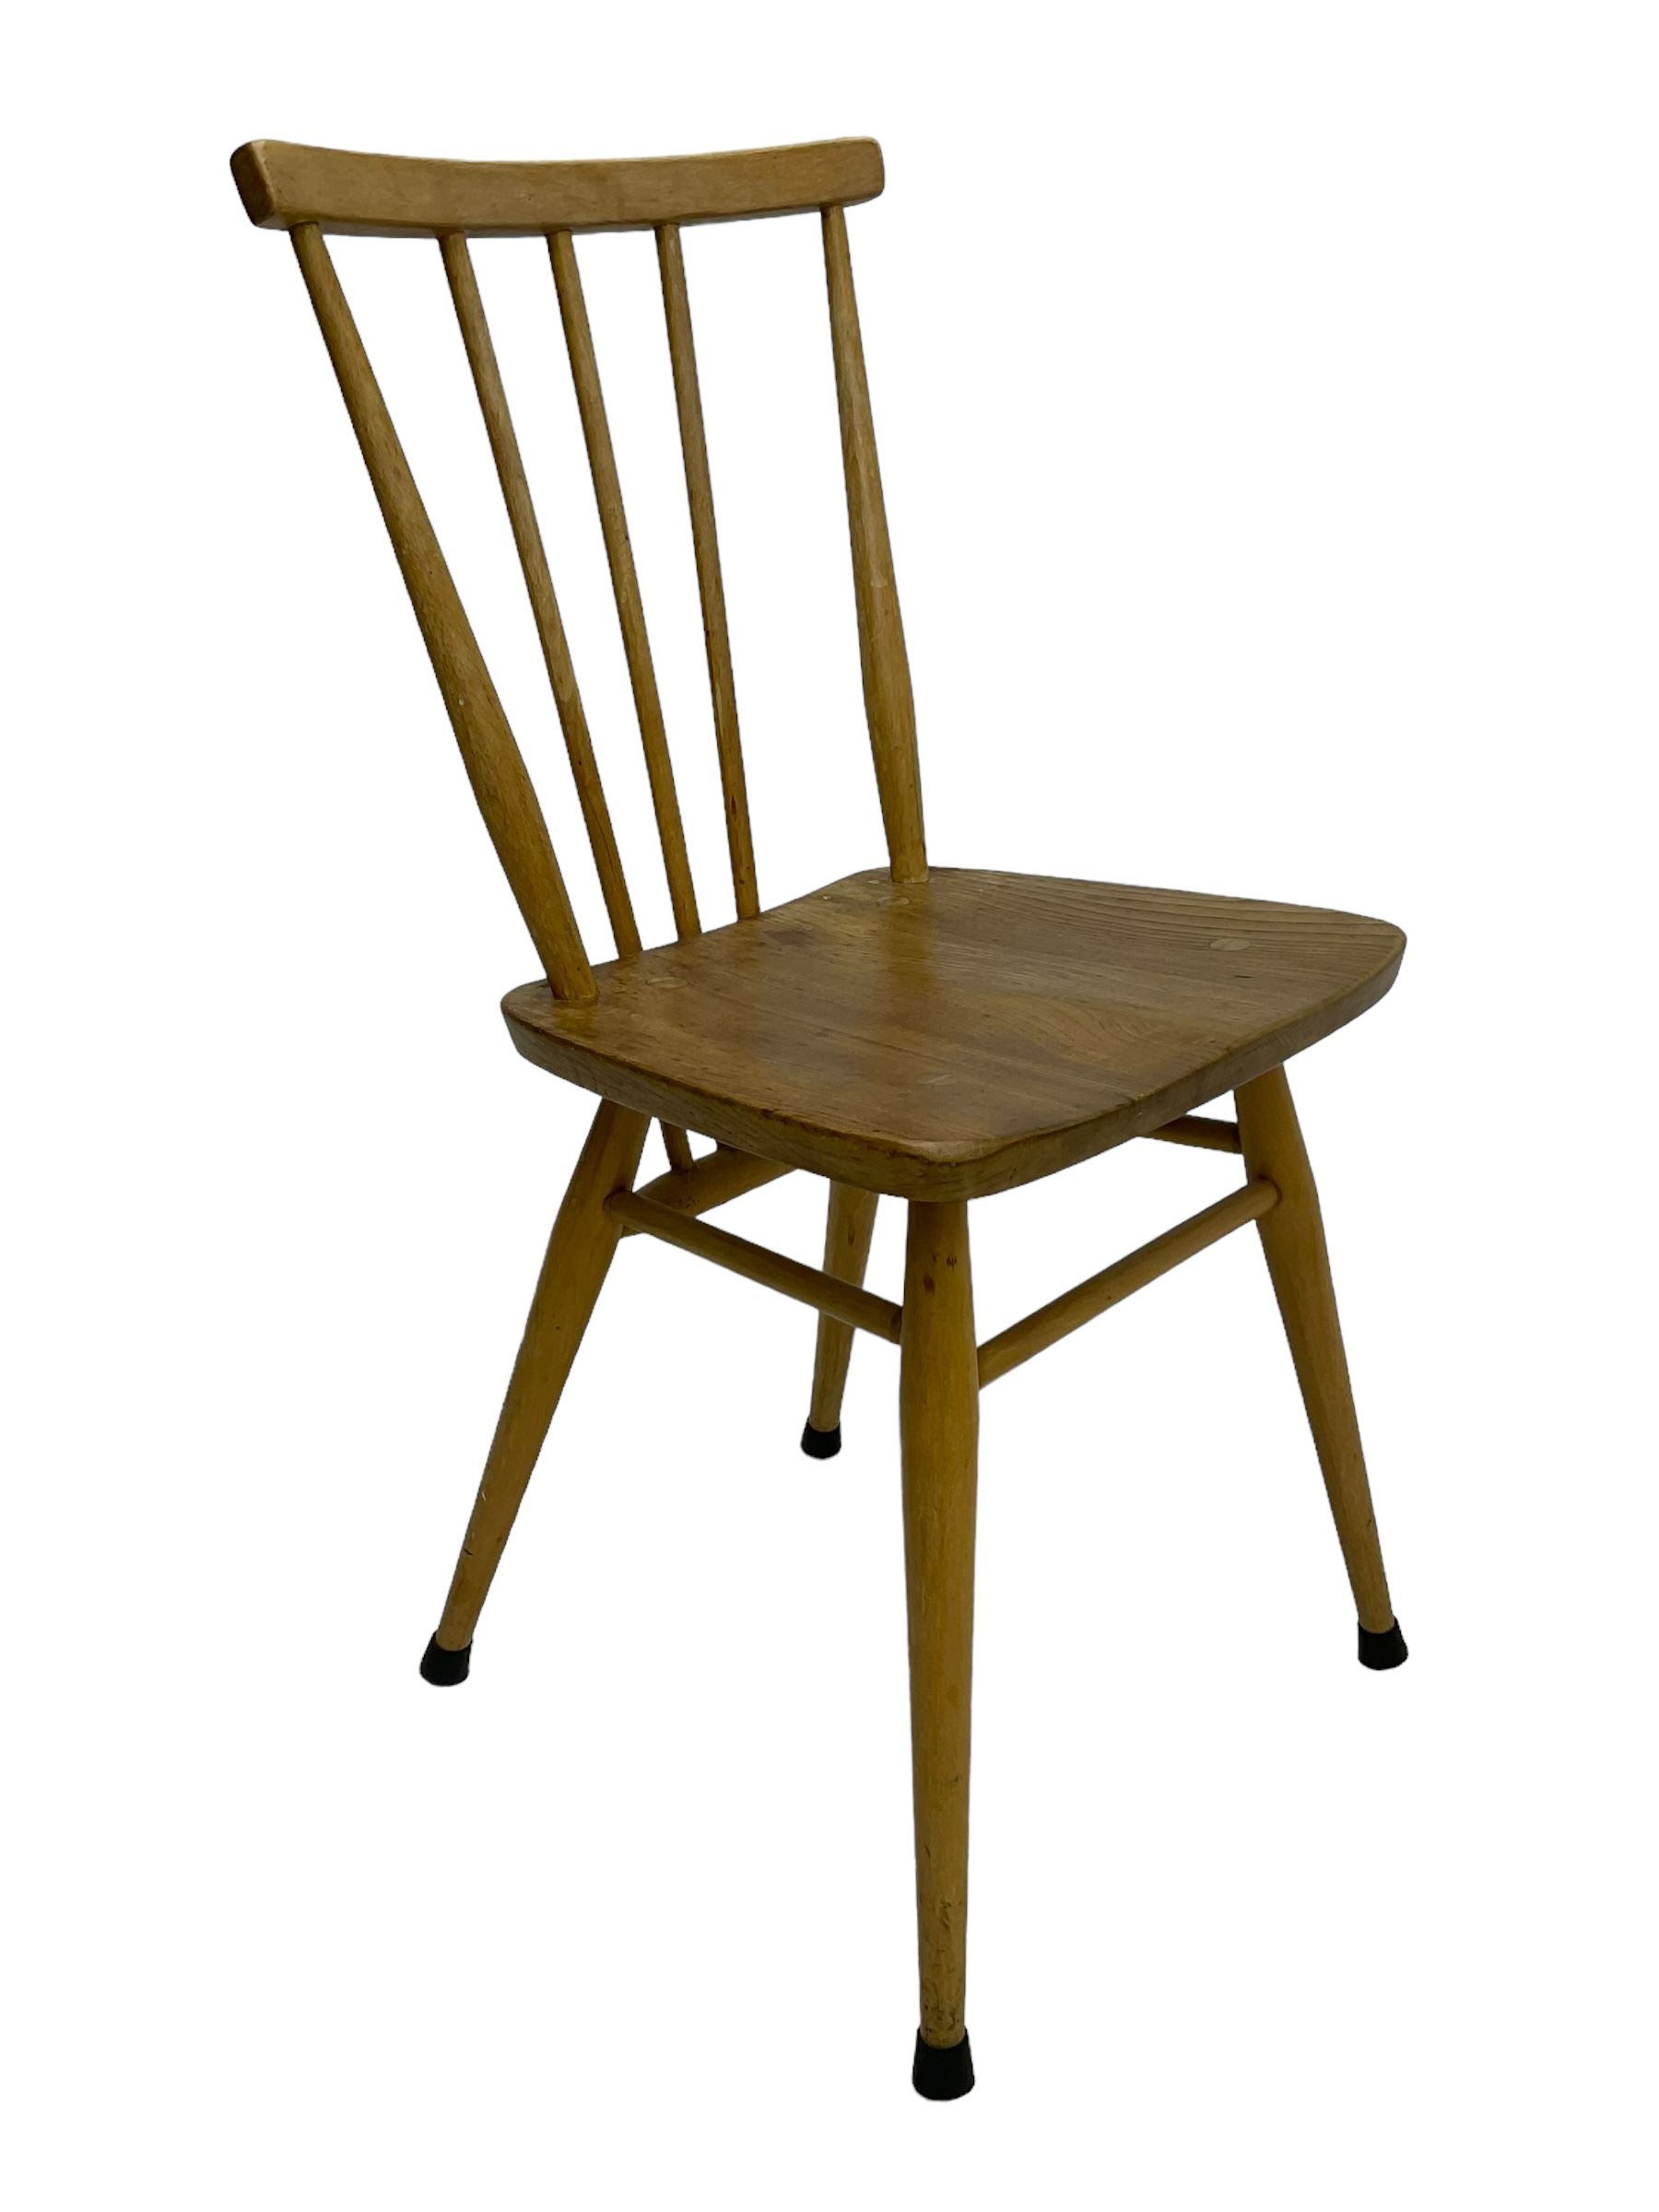 Ercol - set of three elm and beech model '391 All-Purpose Windsor Chairs' - Image 2 of 5